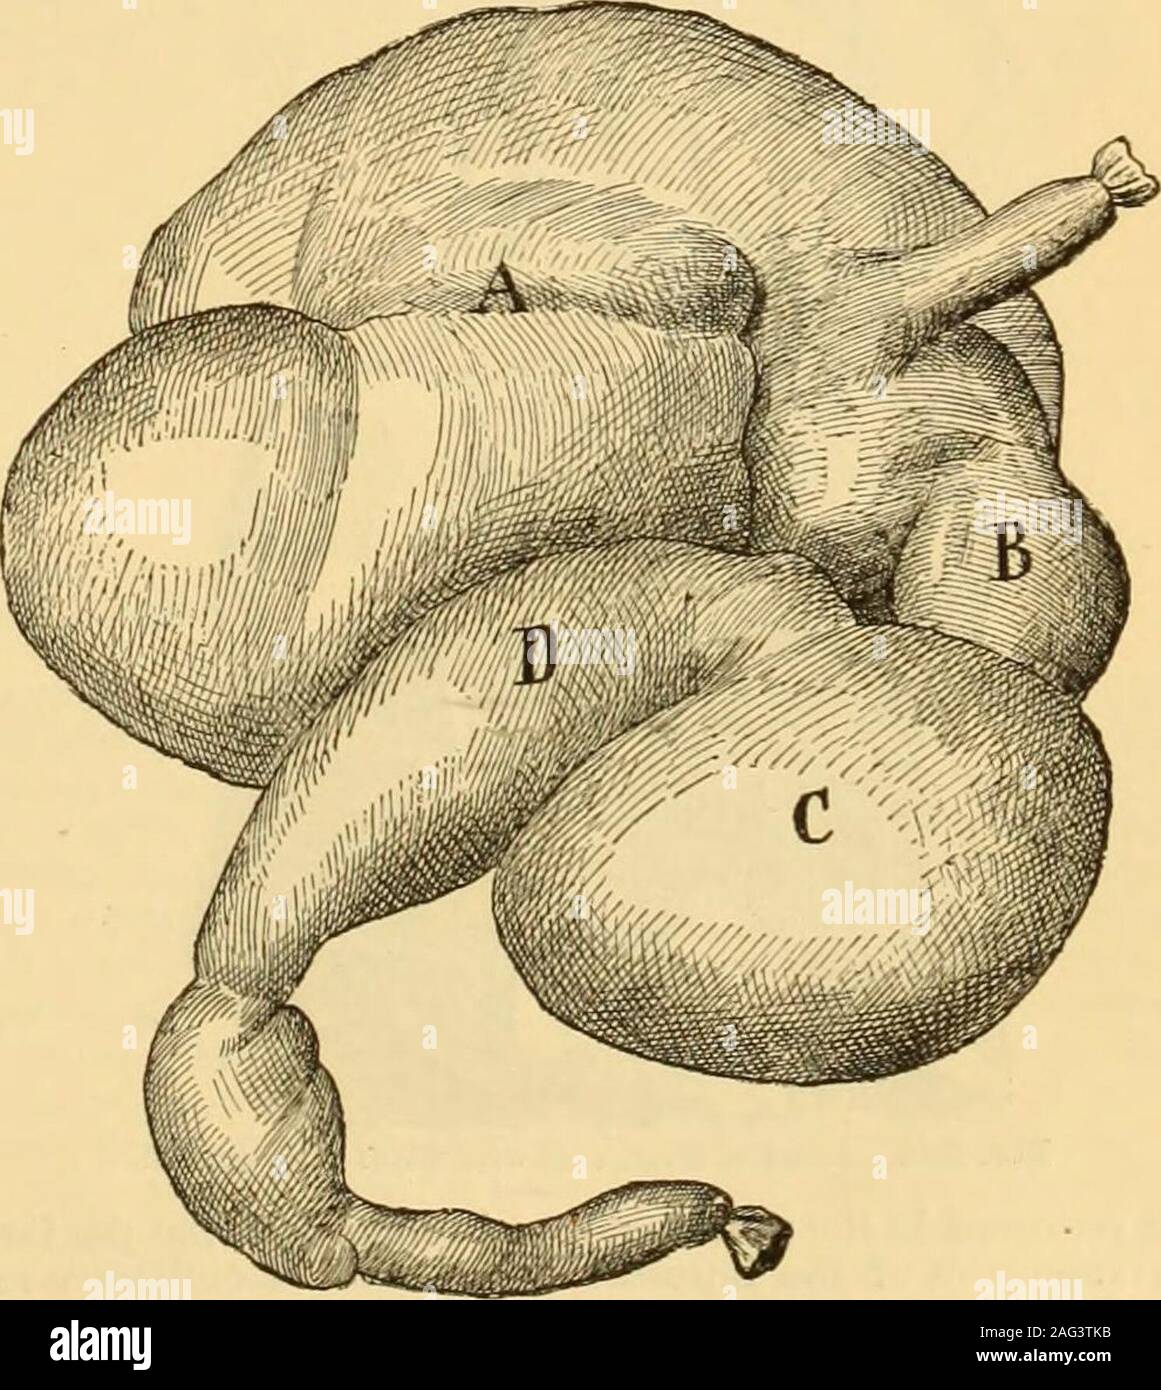 . A Reference handbook of the medical sciences : embracing the entire range of scientific and practical medicine and allied science. in cattle lies in a fold of the mesentery,and its duct, which is single, empties into the intestinefrom fourteen to sixteen inches beyond the ductus cho-ledochus. It is better, therefore, after opening the duo-denum and examining the common bile-duct, to remove theintestines together with the mesentery and including thi pan-creas. The intestines having been removed, the pancreasshould be freed from its attachments and excised. Themesentery should then be dissecte Stock Photo